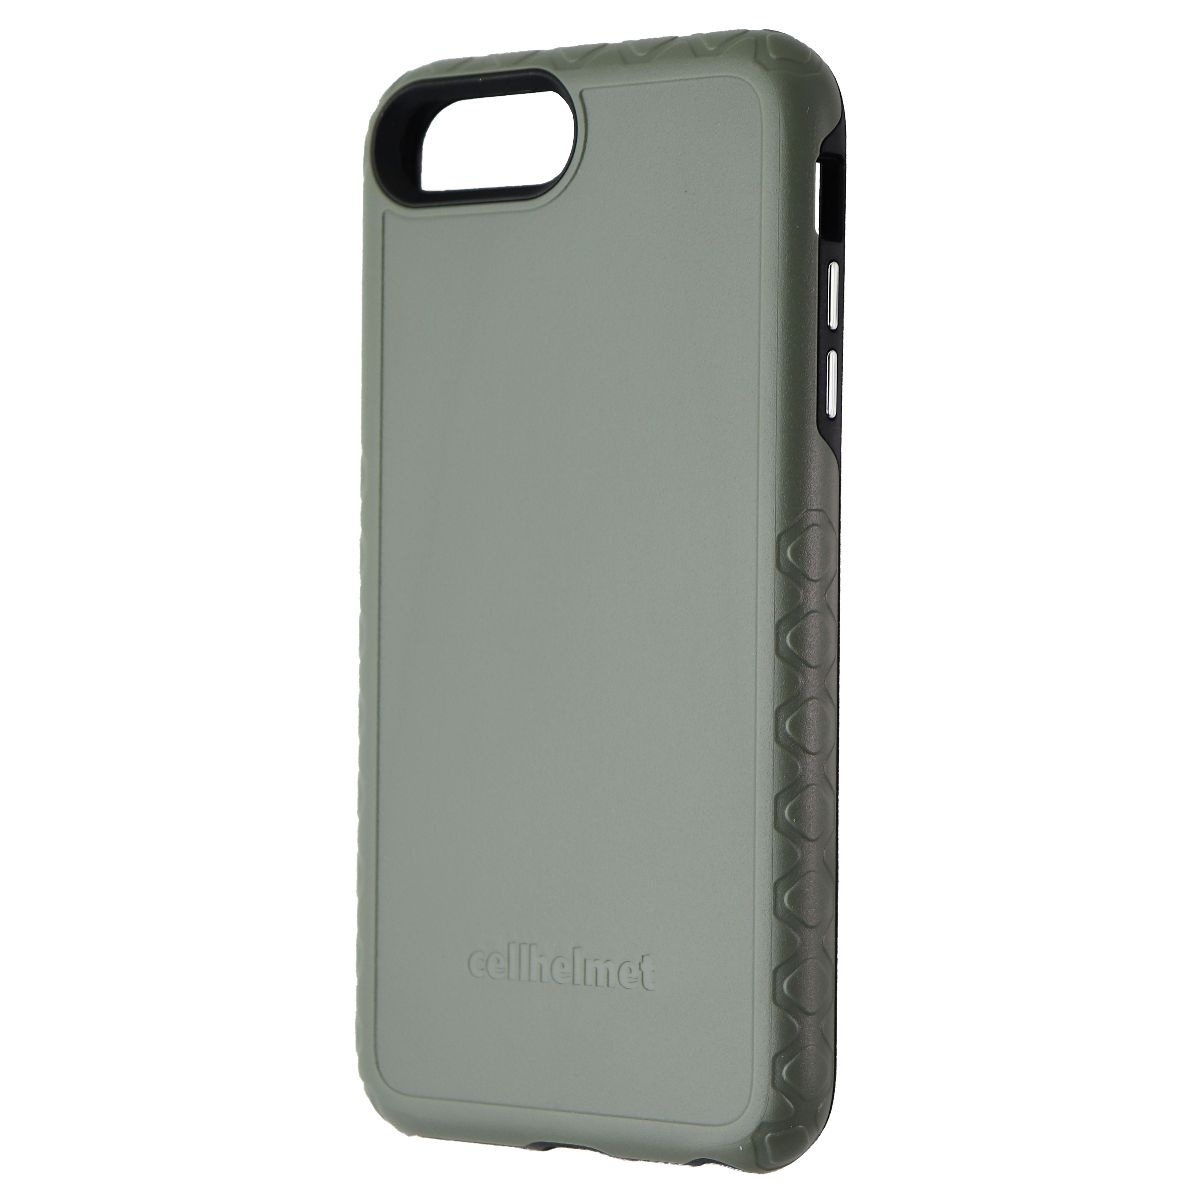 Cellhelmet Fortitude Series Olive Drab Green Case For IPhone 6+ / 7+ / 8 +